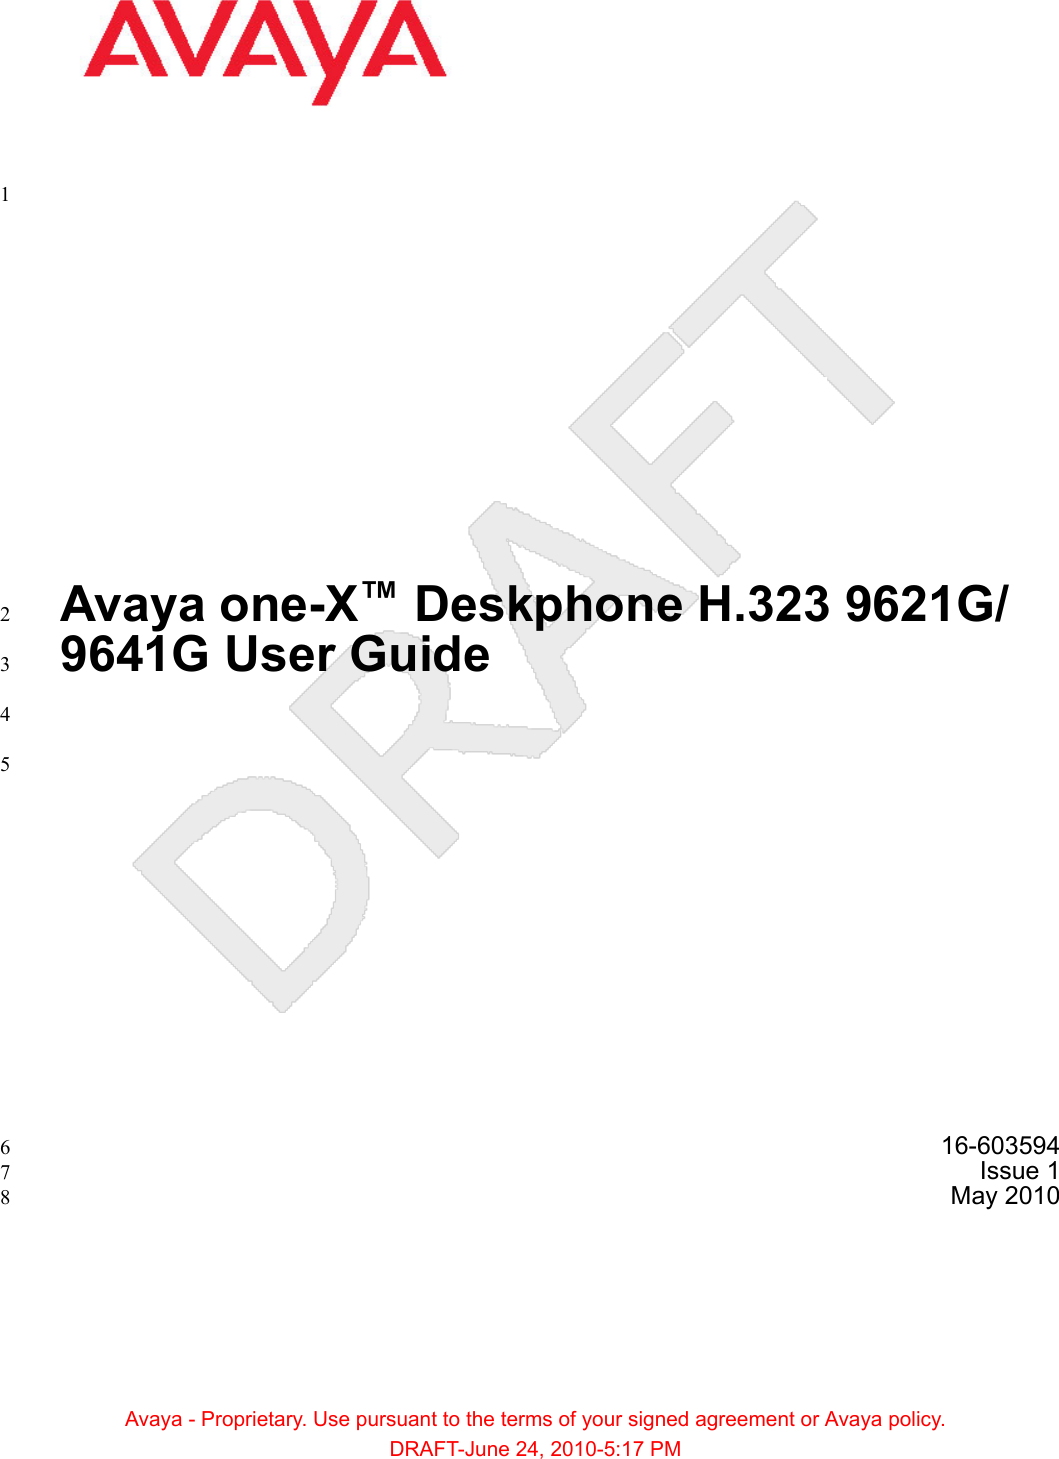 1Avaya one-X™ Deskphone H.323 9621G/29641G User Guide34516-6035946Issue 17May 20108Avaya - Proprietary. Use pursuant to the terms of your signed agreement or Avaya policy.DRAFT-June 24, 2010-5:17 PM